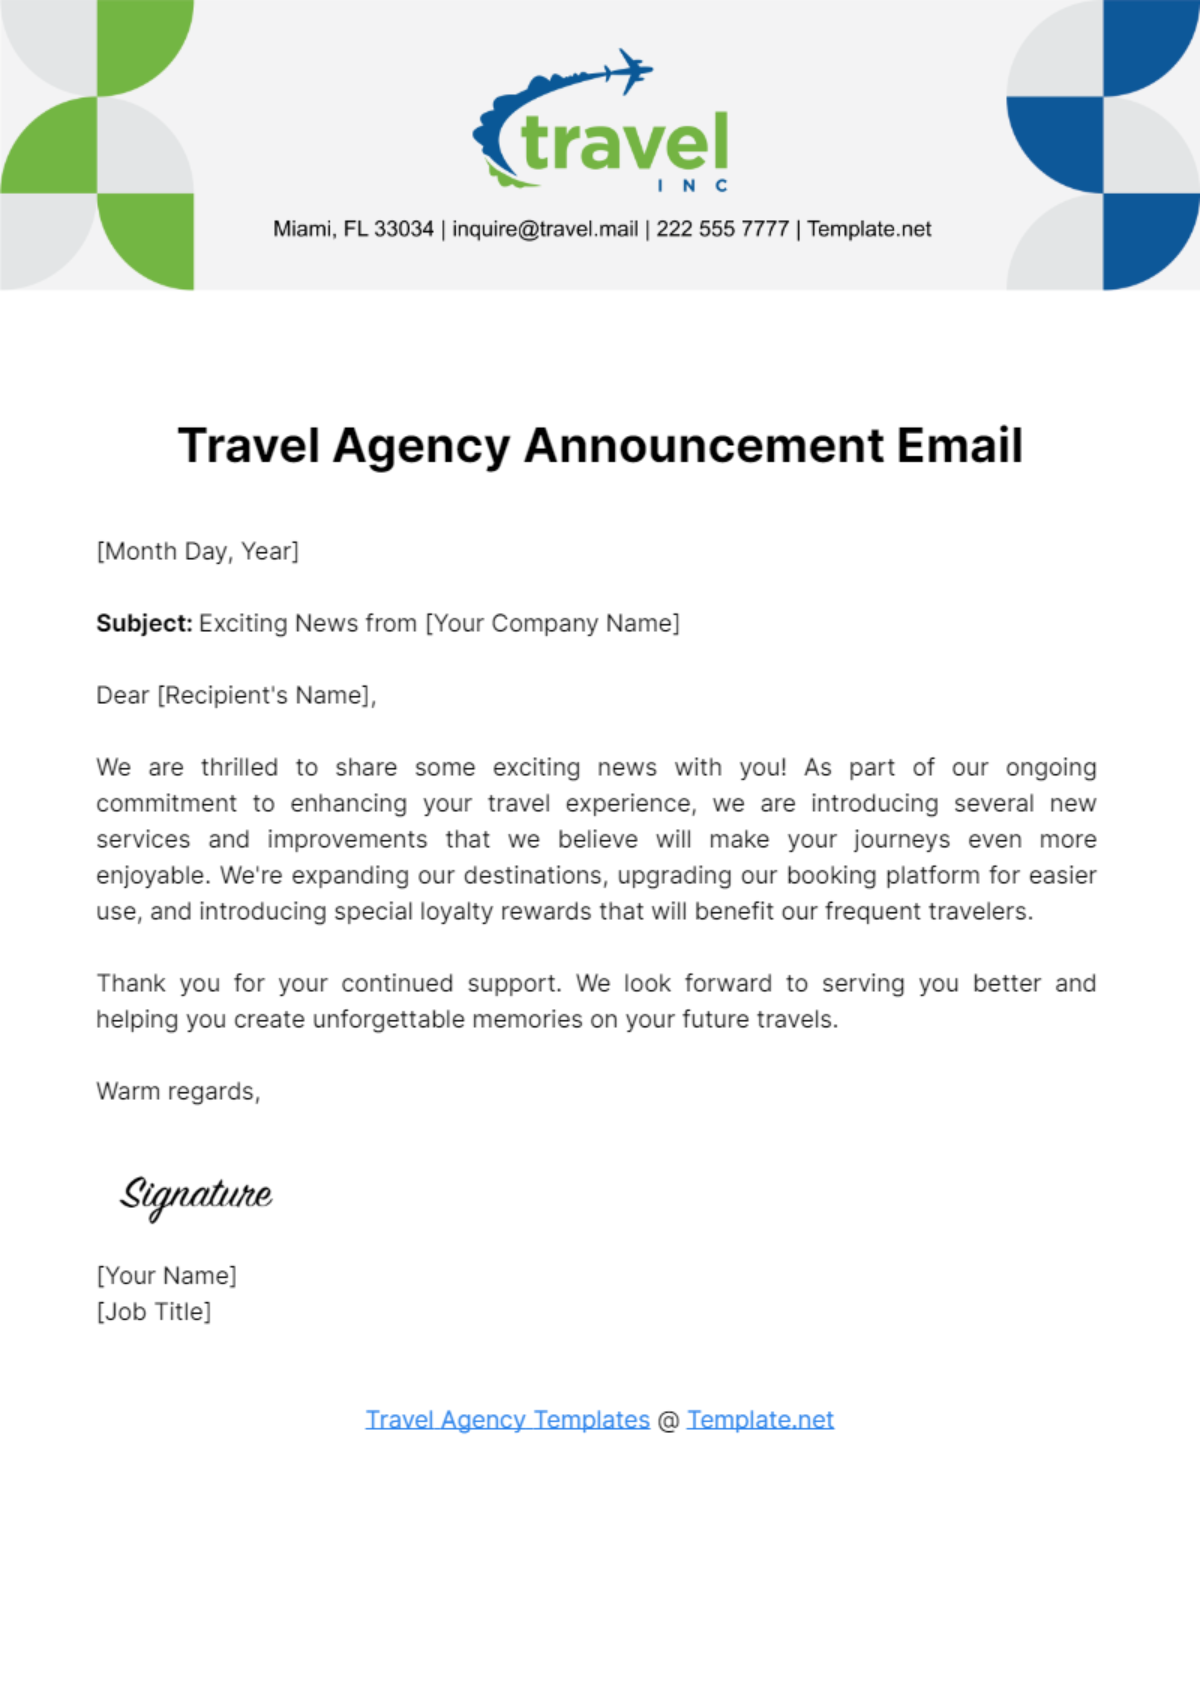 Travel Agency Announcement Email Template